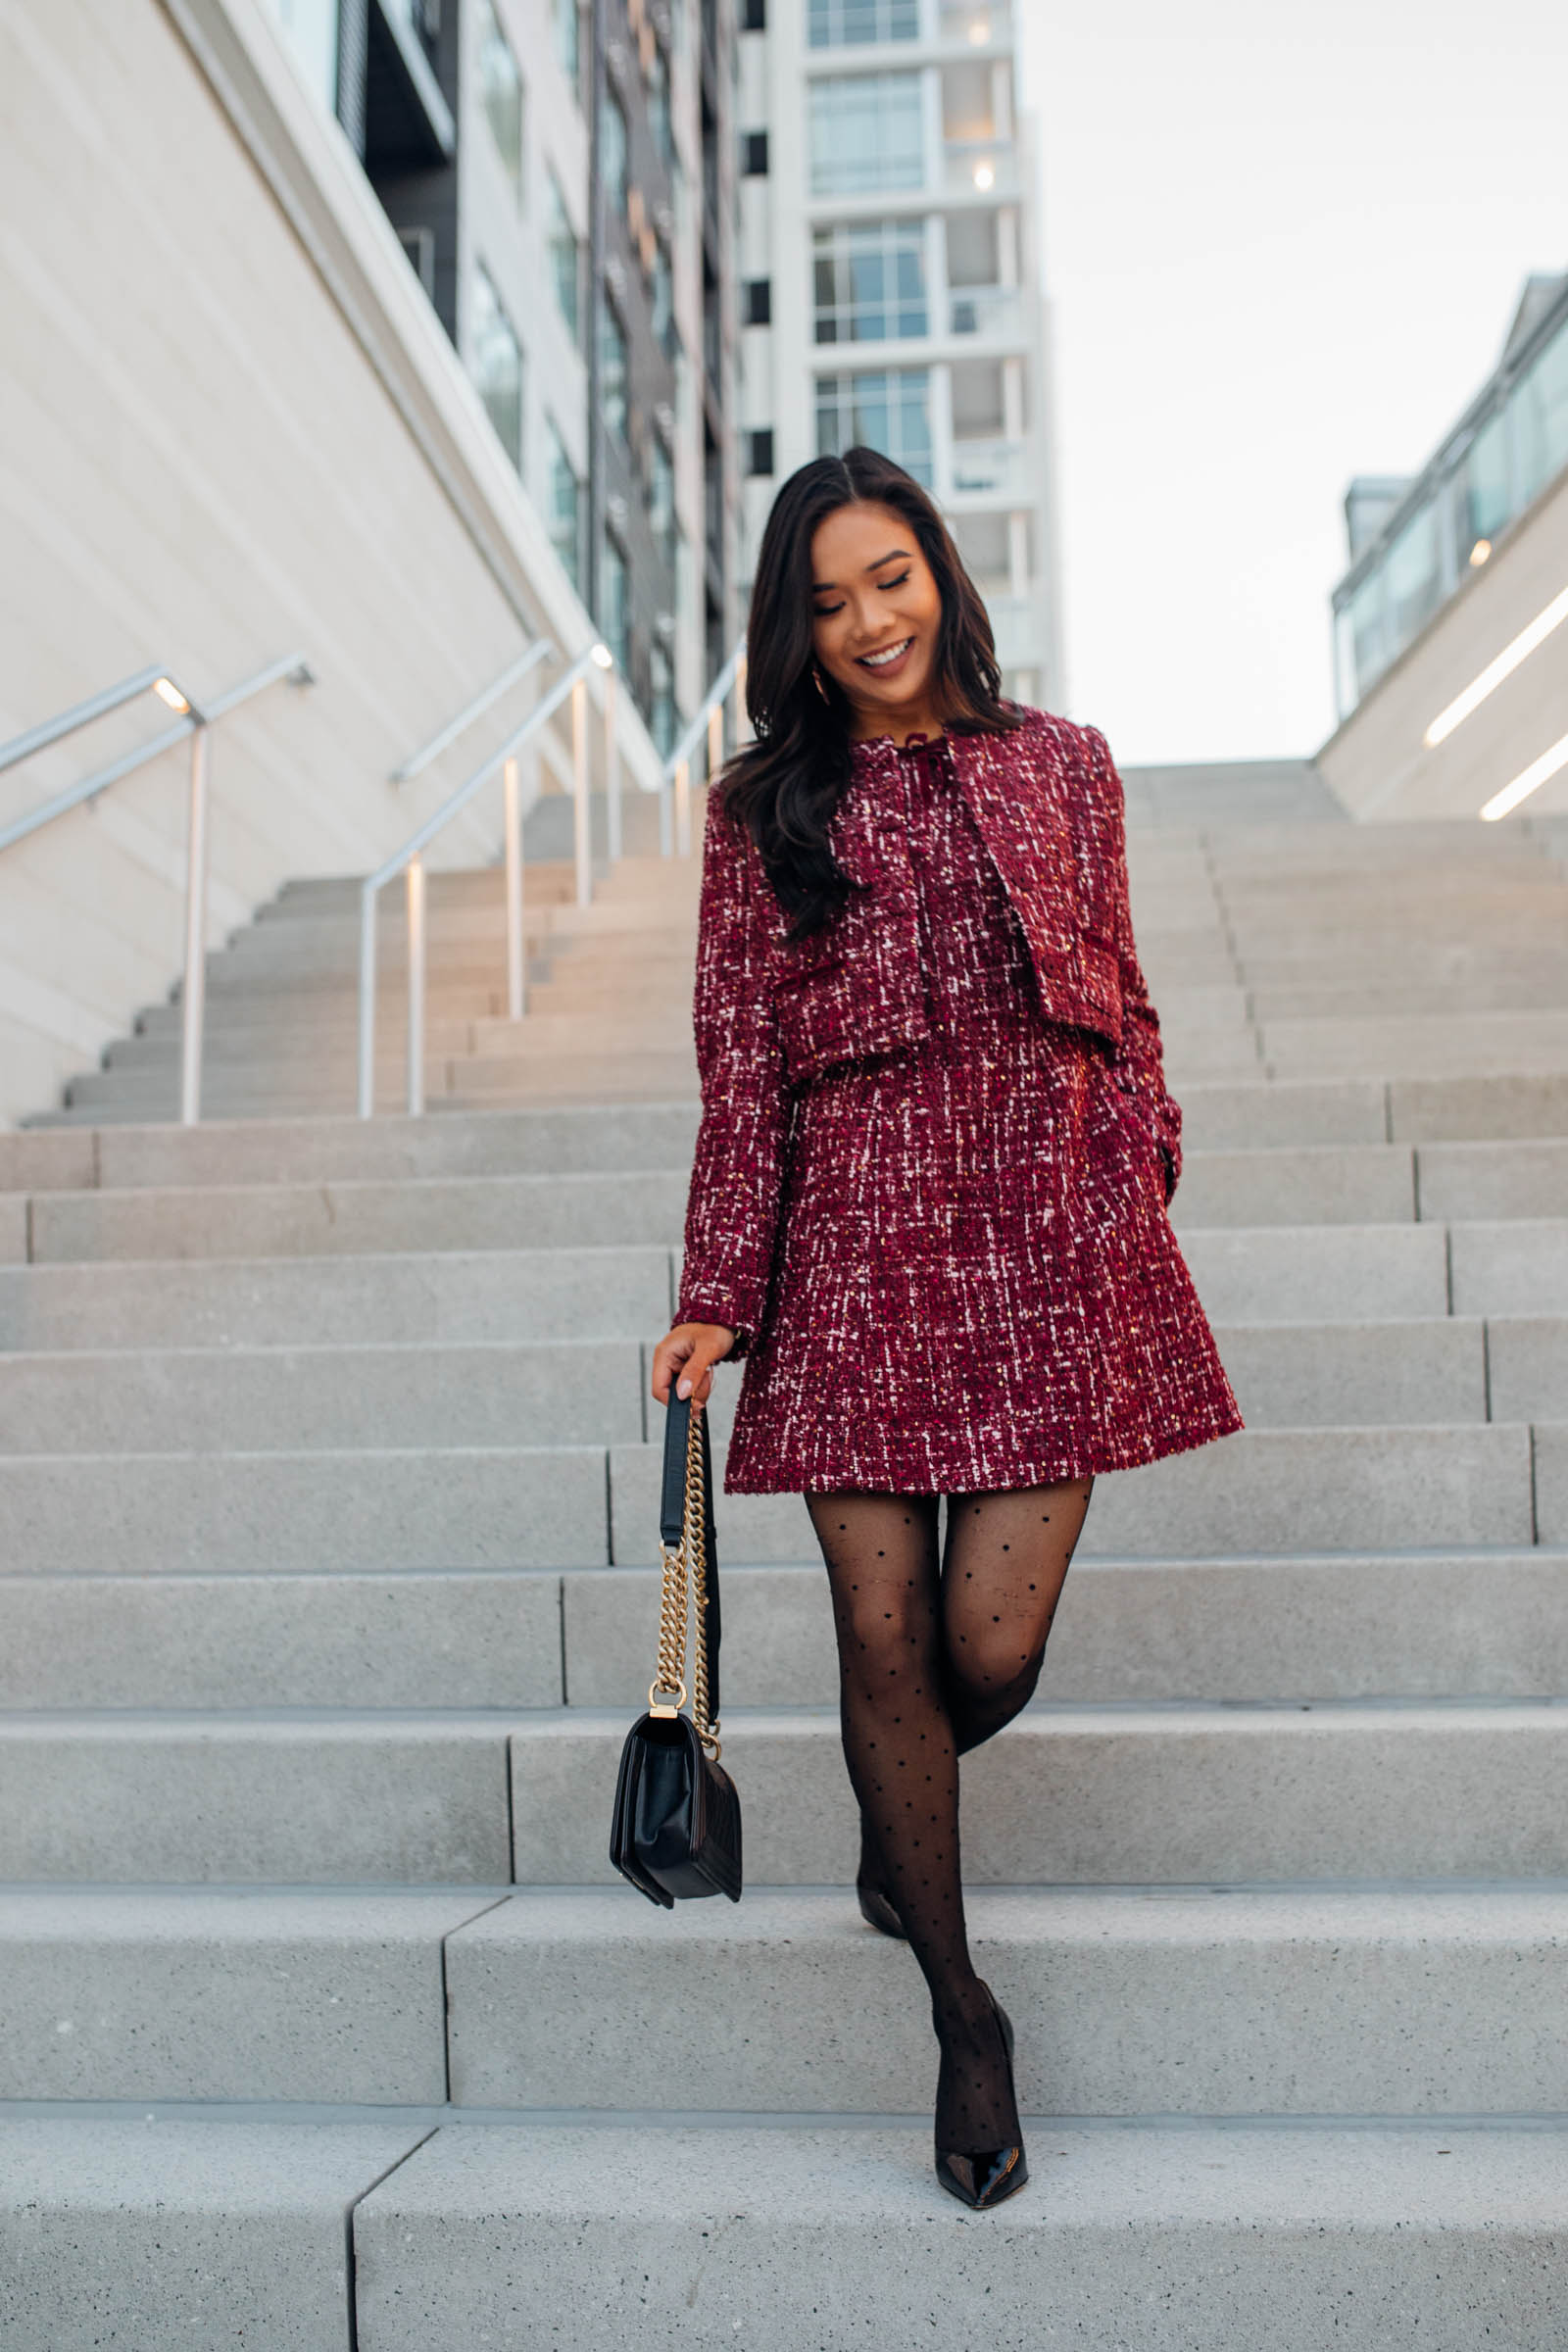 Blogger Hoang-Kim wears a matching tweed dress and jacket from Gal Meets Glam